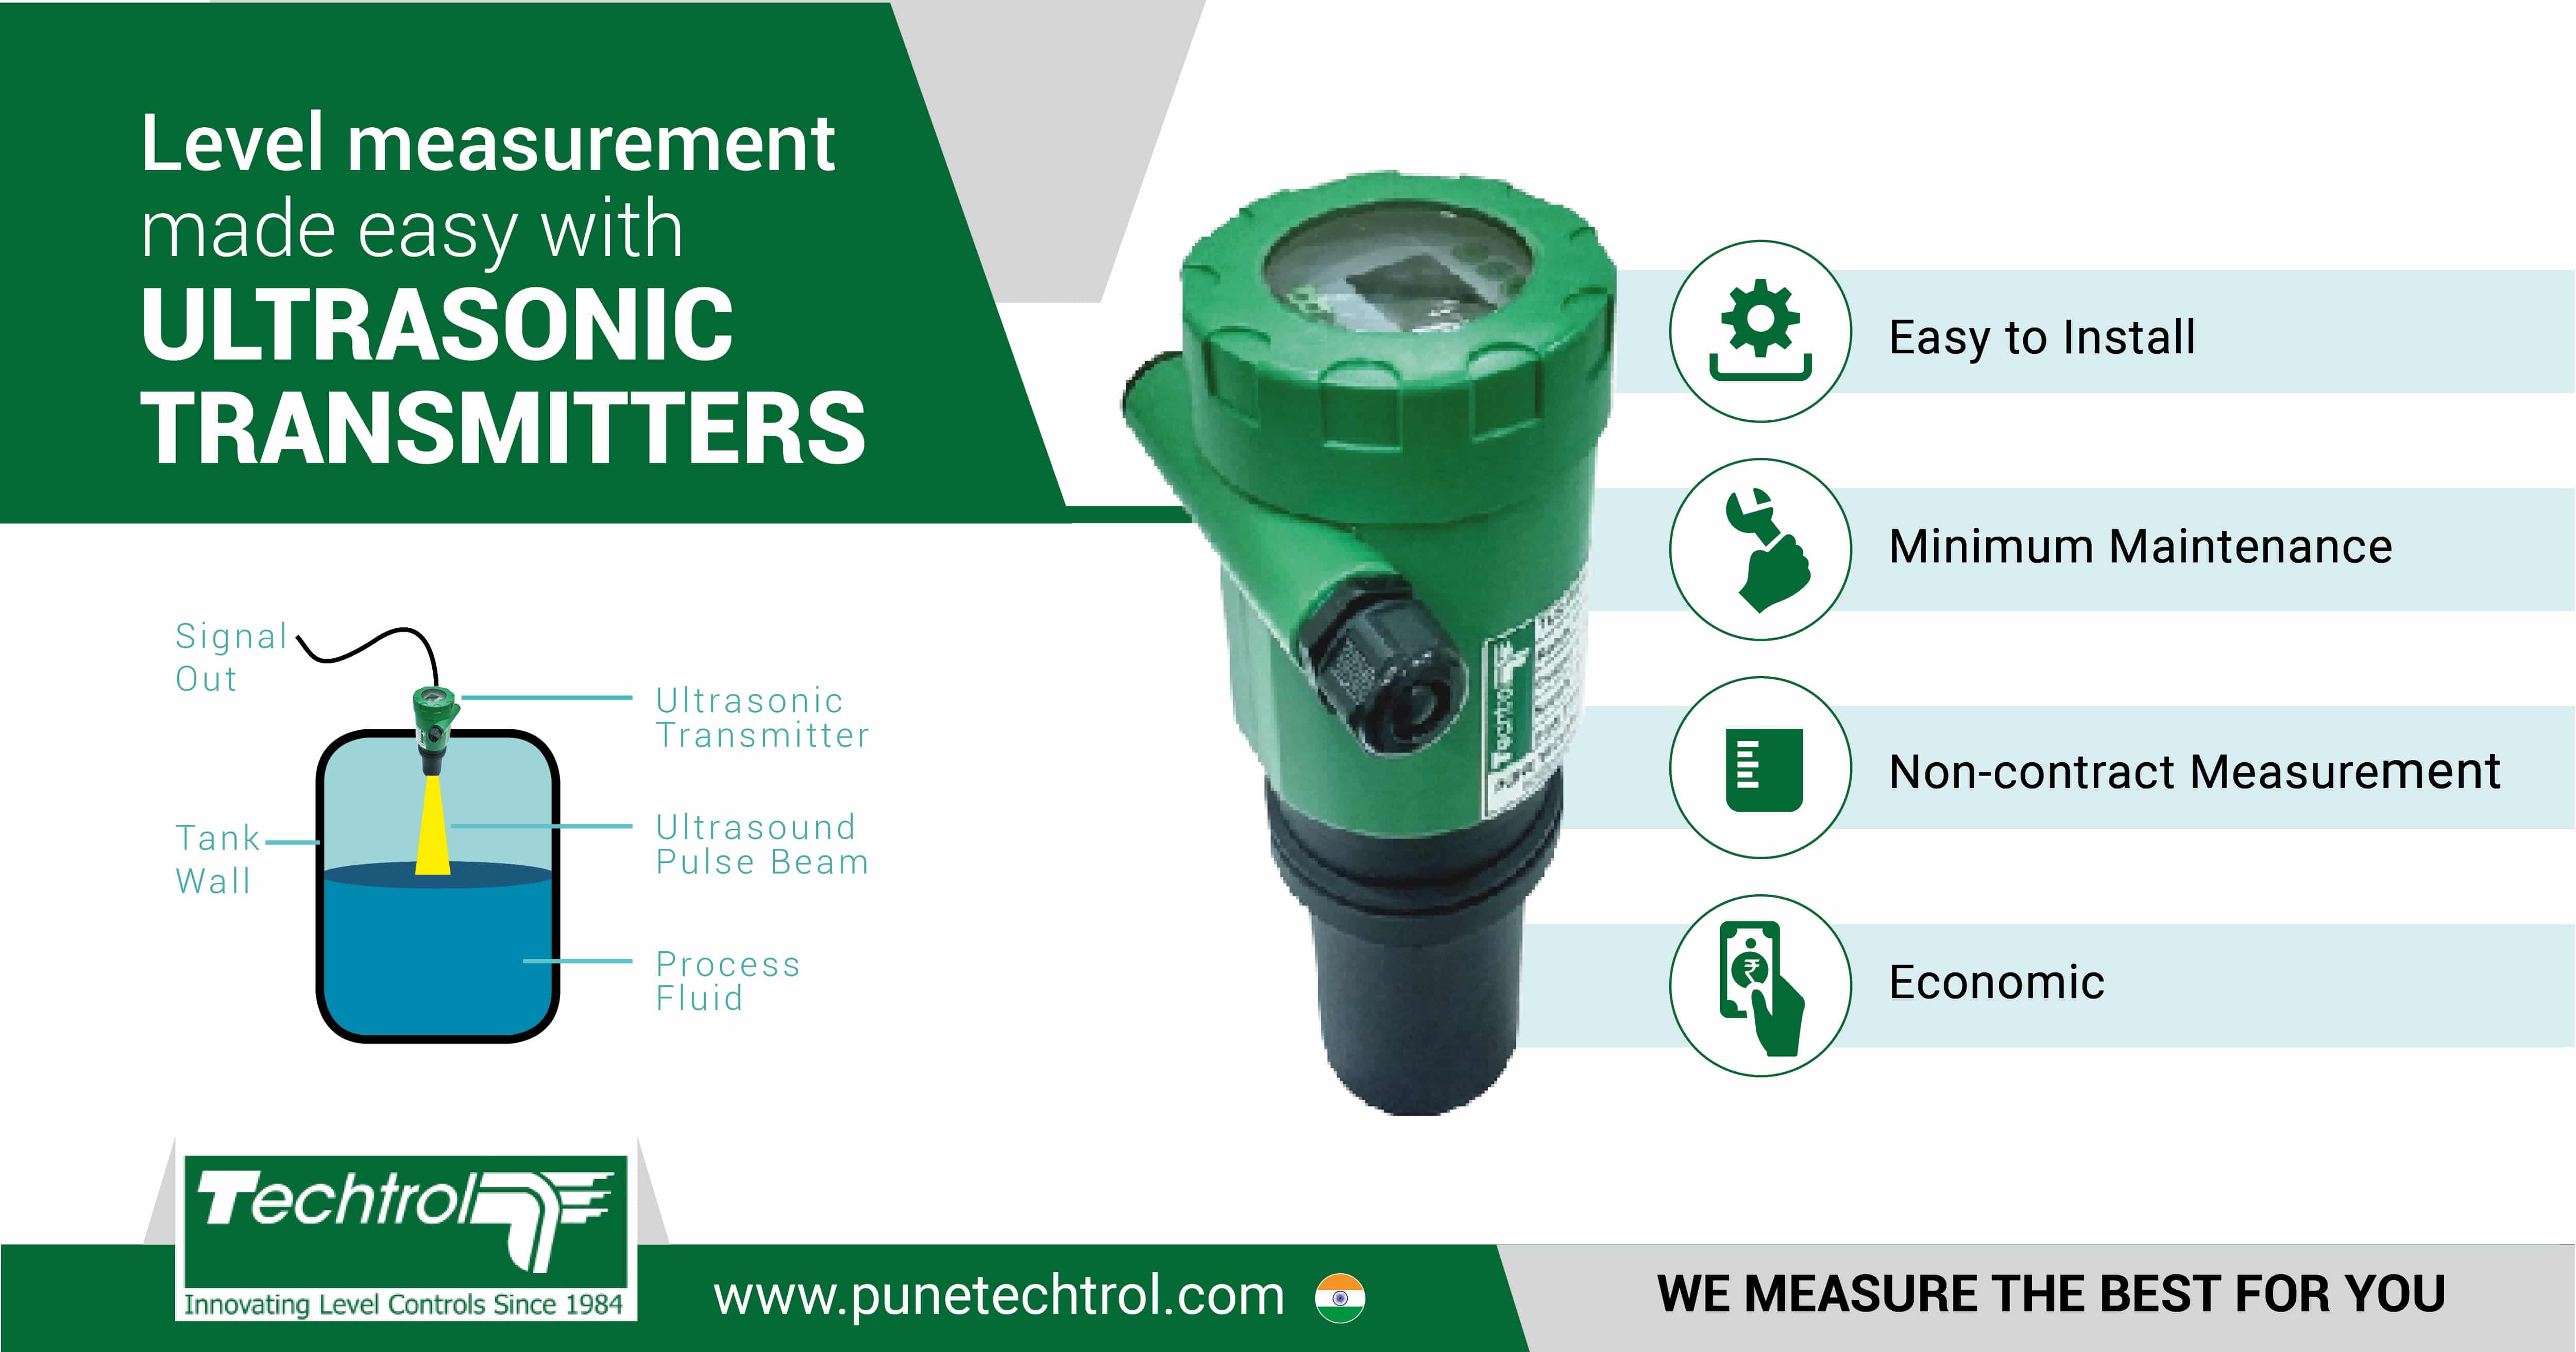 Ultrasonic Transmitter For Level Measurement In Tanks/ Reservoirs/ Canals